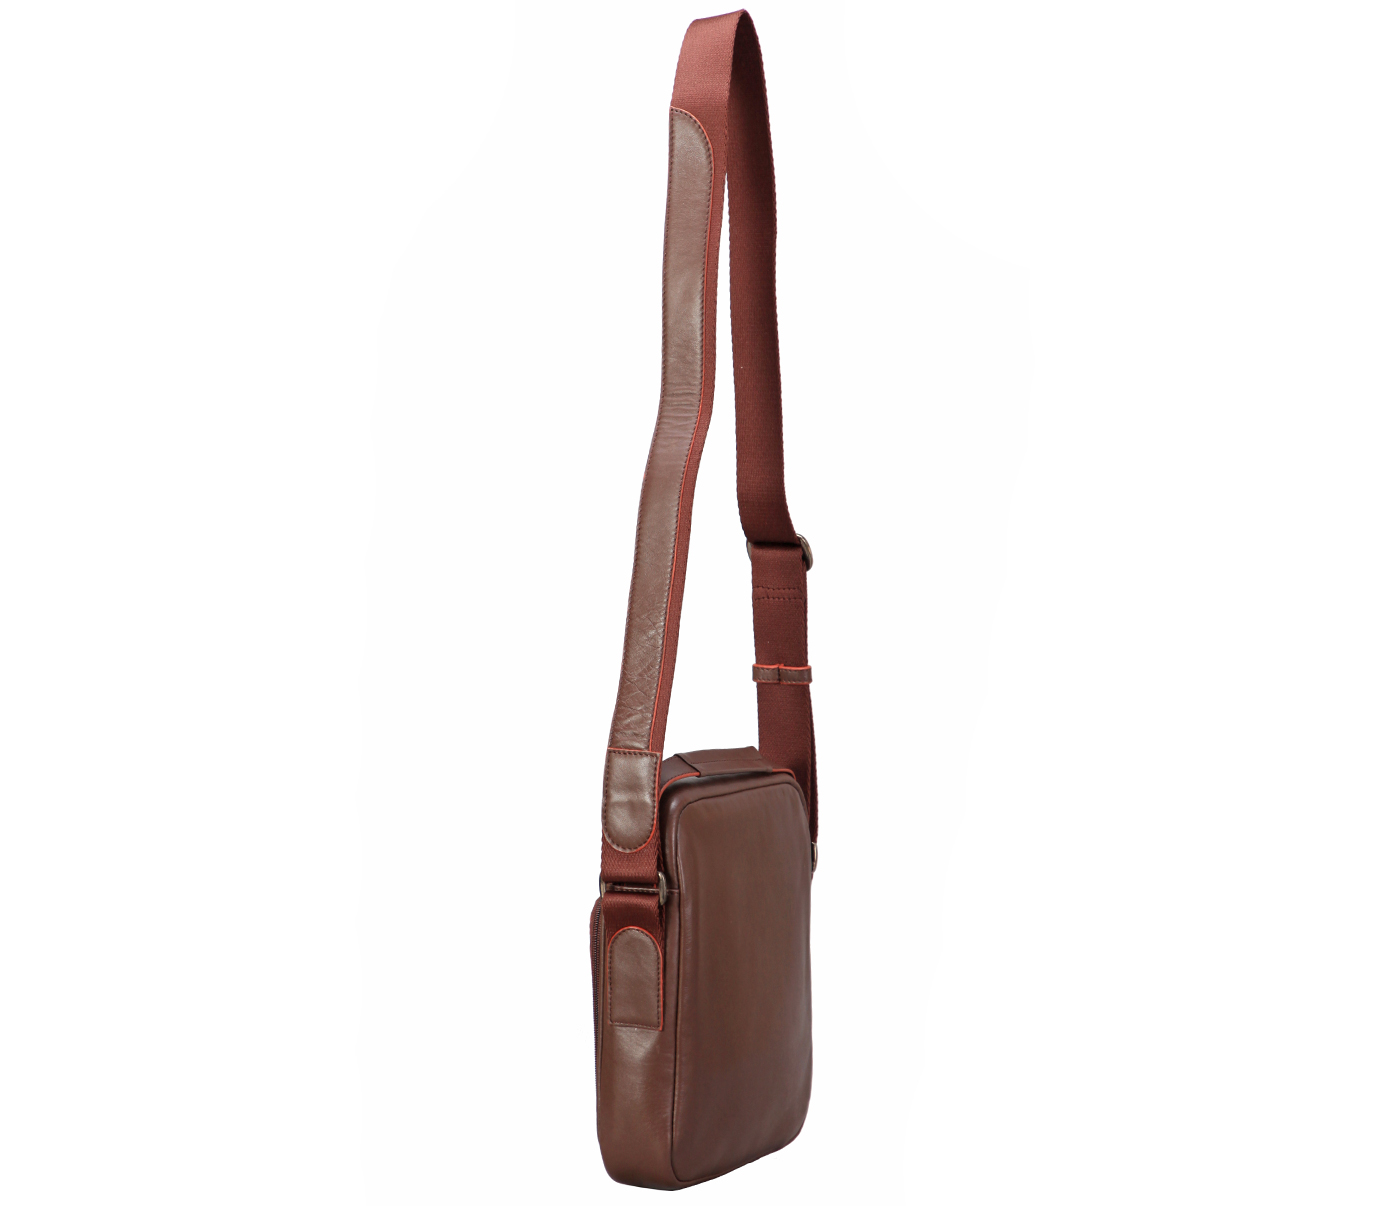 P38-Rafael-Men's Travel Pouch in Genuine Leather - Brown